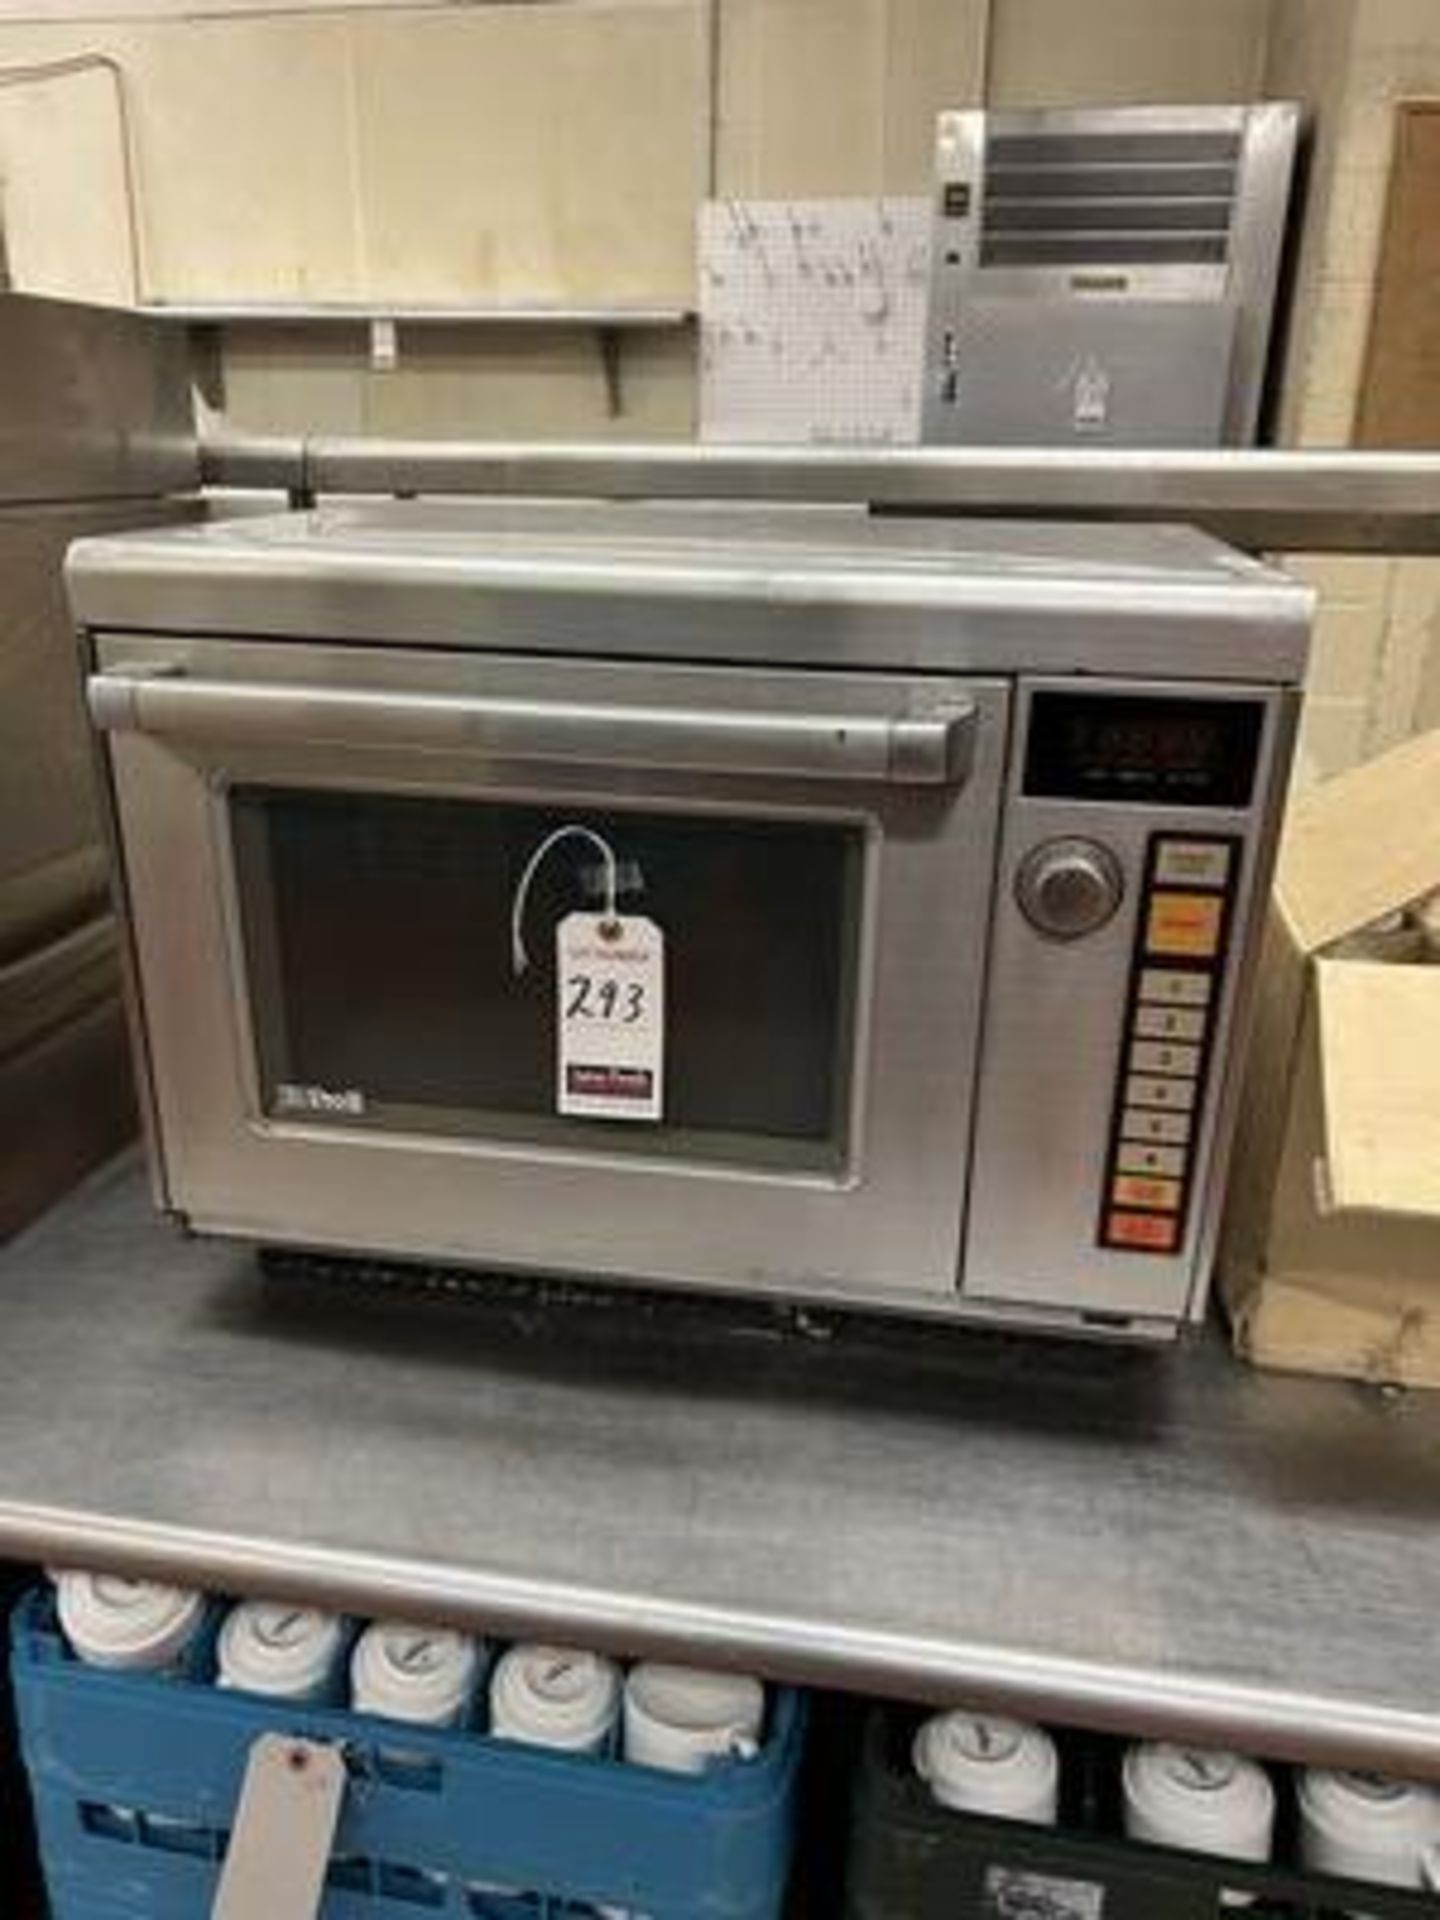 PRO II DIG. MICROWAVE OVEN